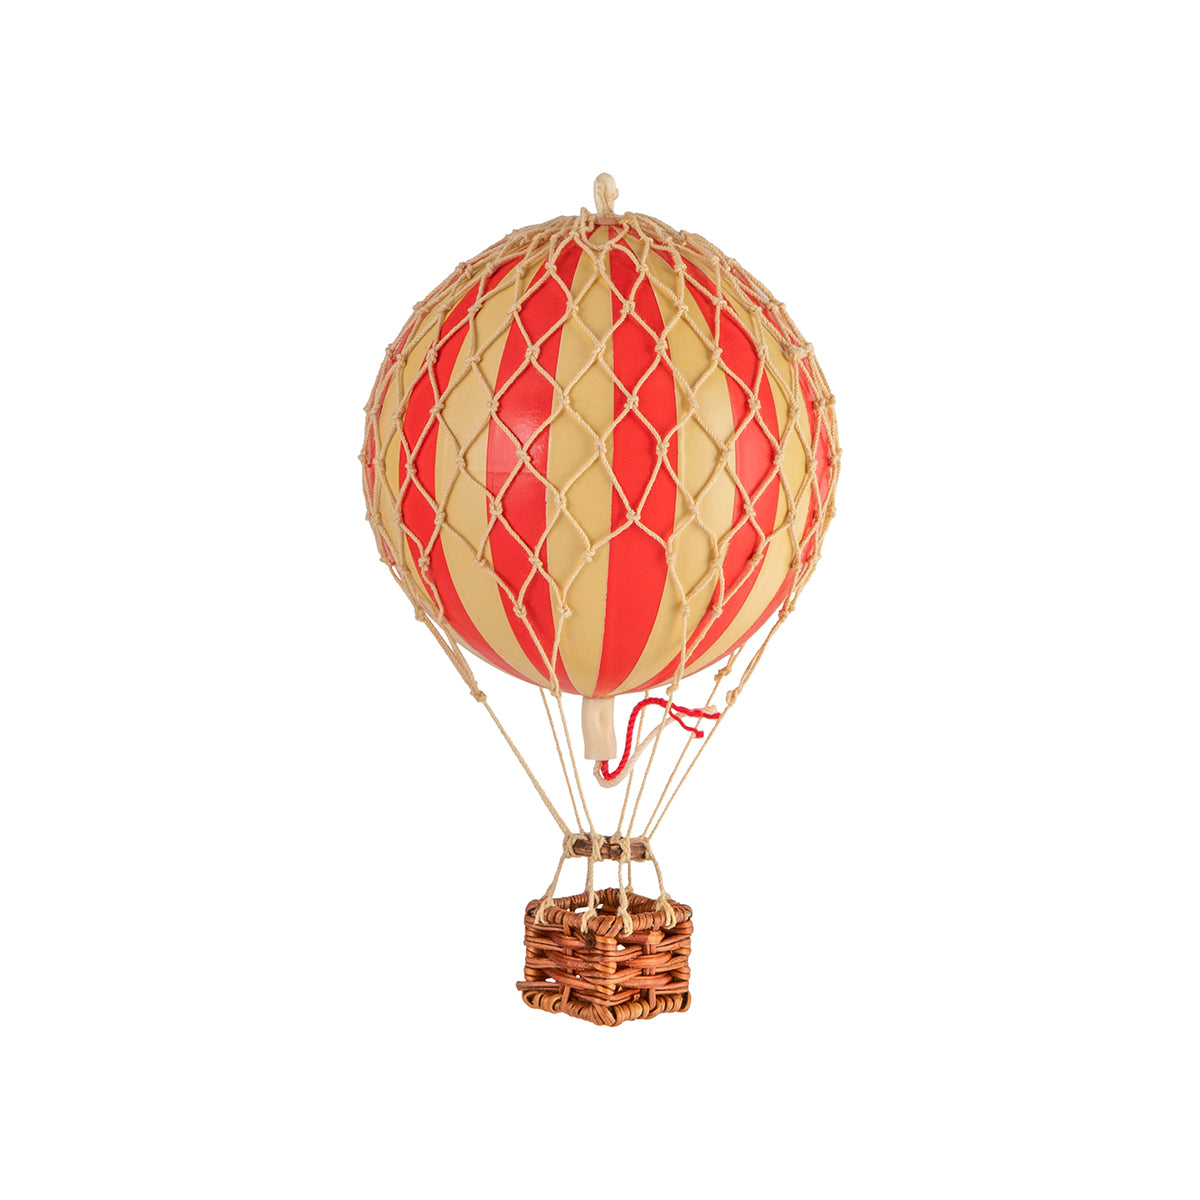 A whimsical journey in a Wonderen Extra Small Hot Air Balloon - Floating The Skies with red and white stripes.